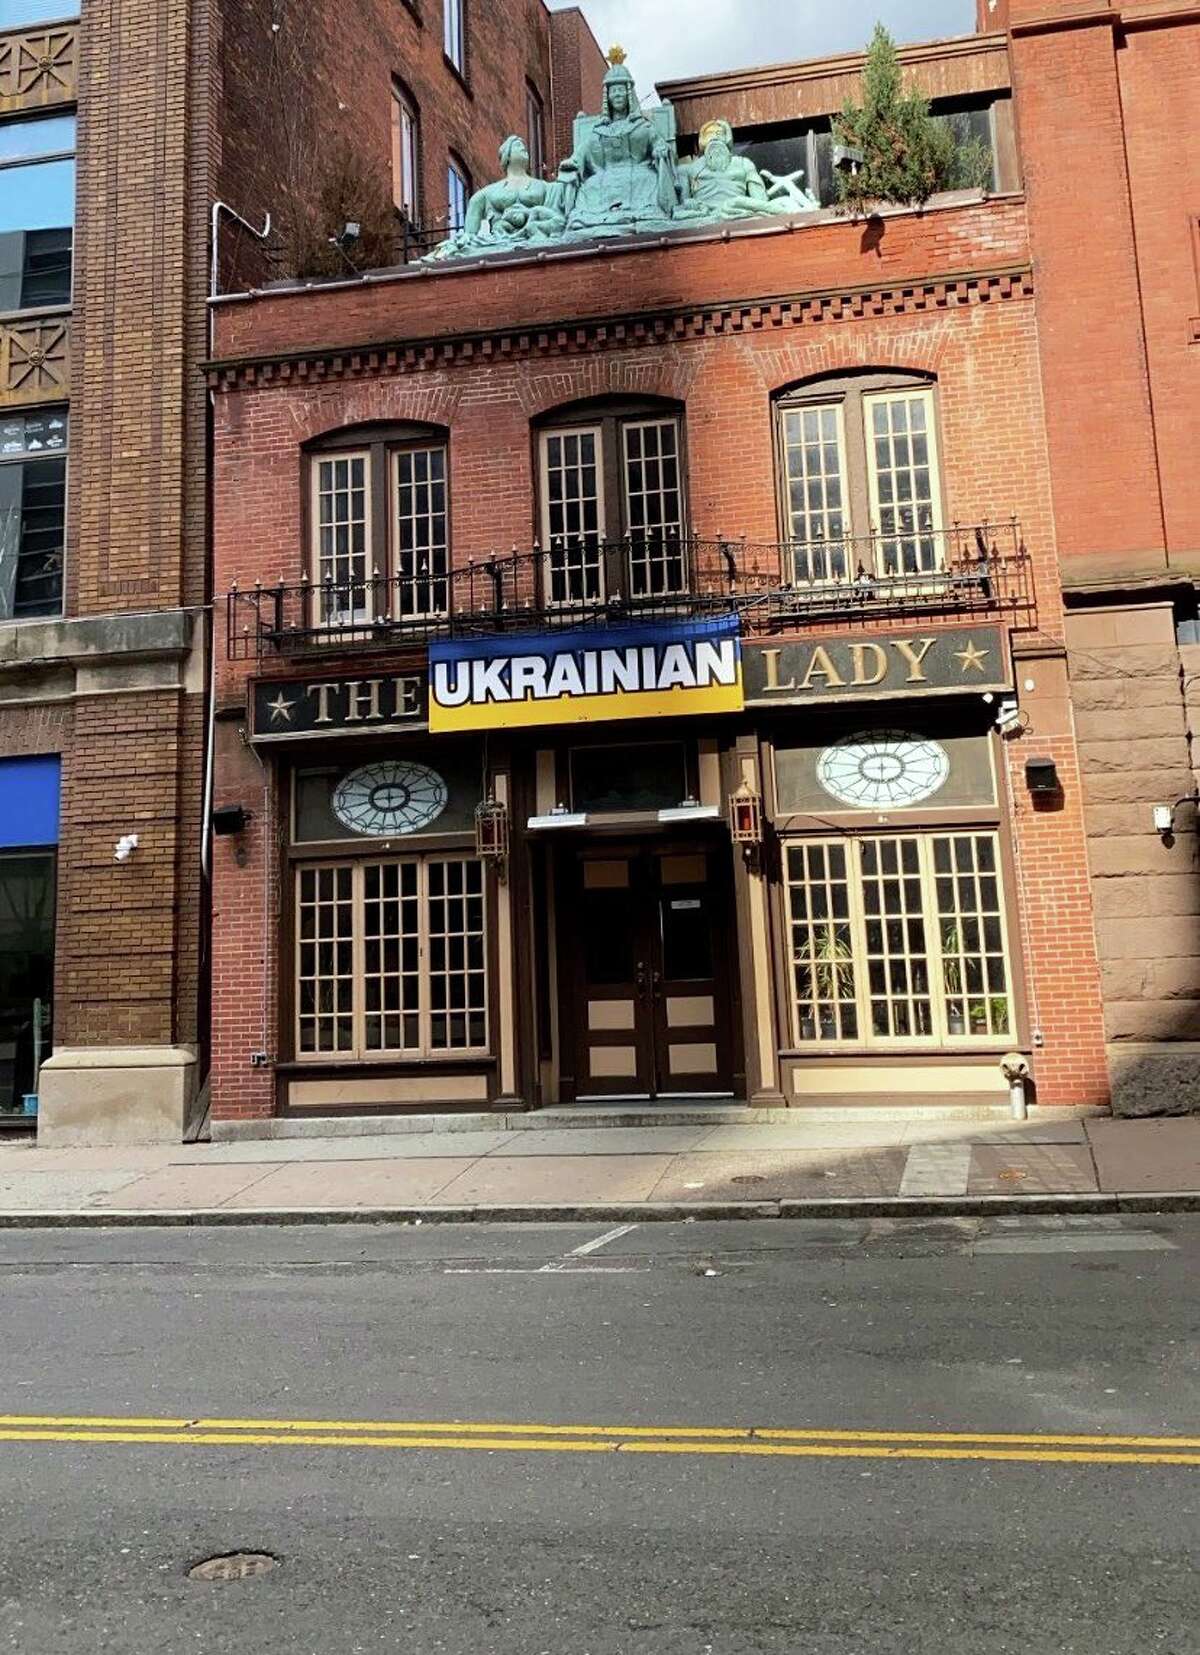 The Russian Lady bar in Hartford, Conn. has been renamed to The Ukrainian Lady in April 2022. 